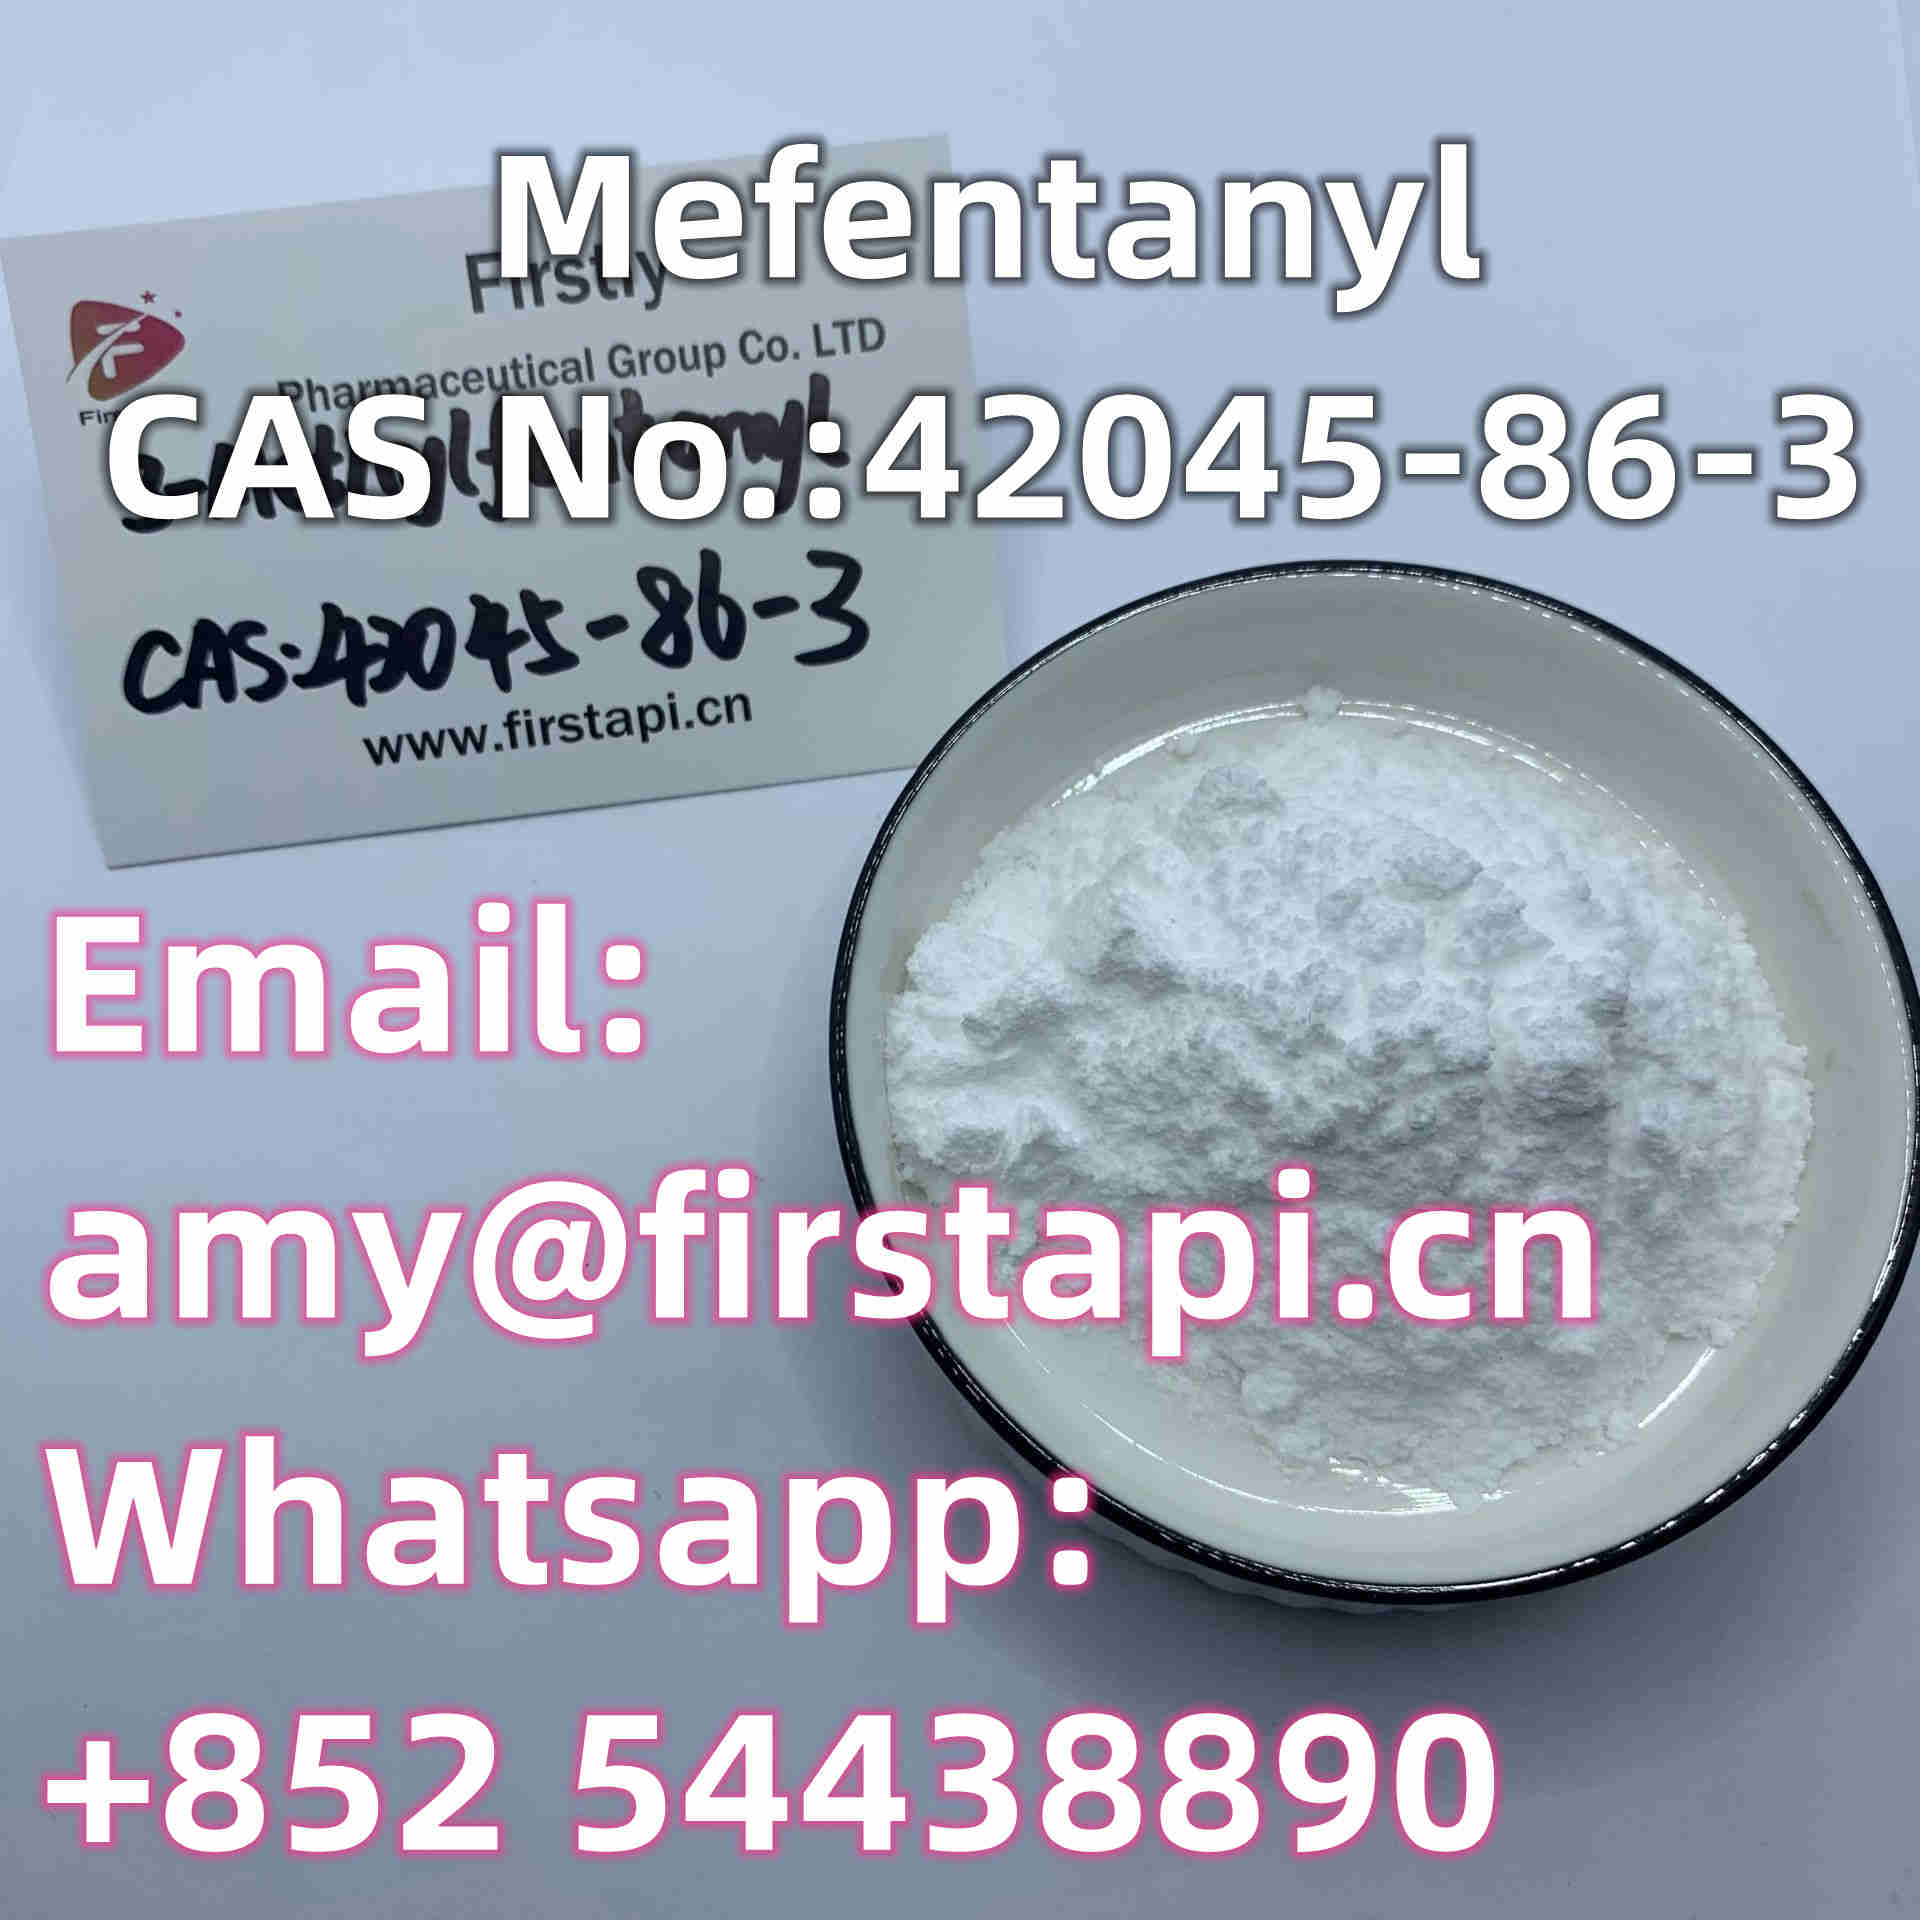 Whatsapp:+852 54438890,Chemical Name:	Mefentanyl,CAS No.:	42045-86-3,salable - photo